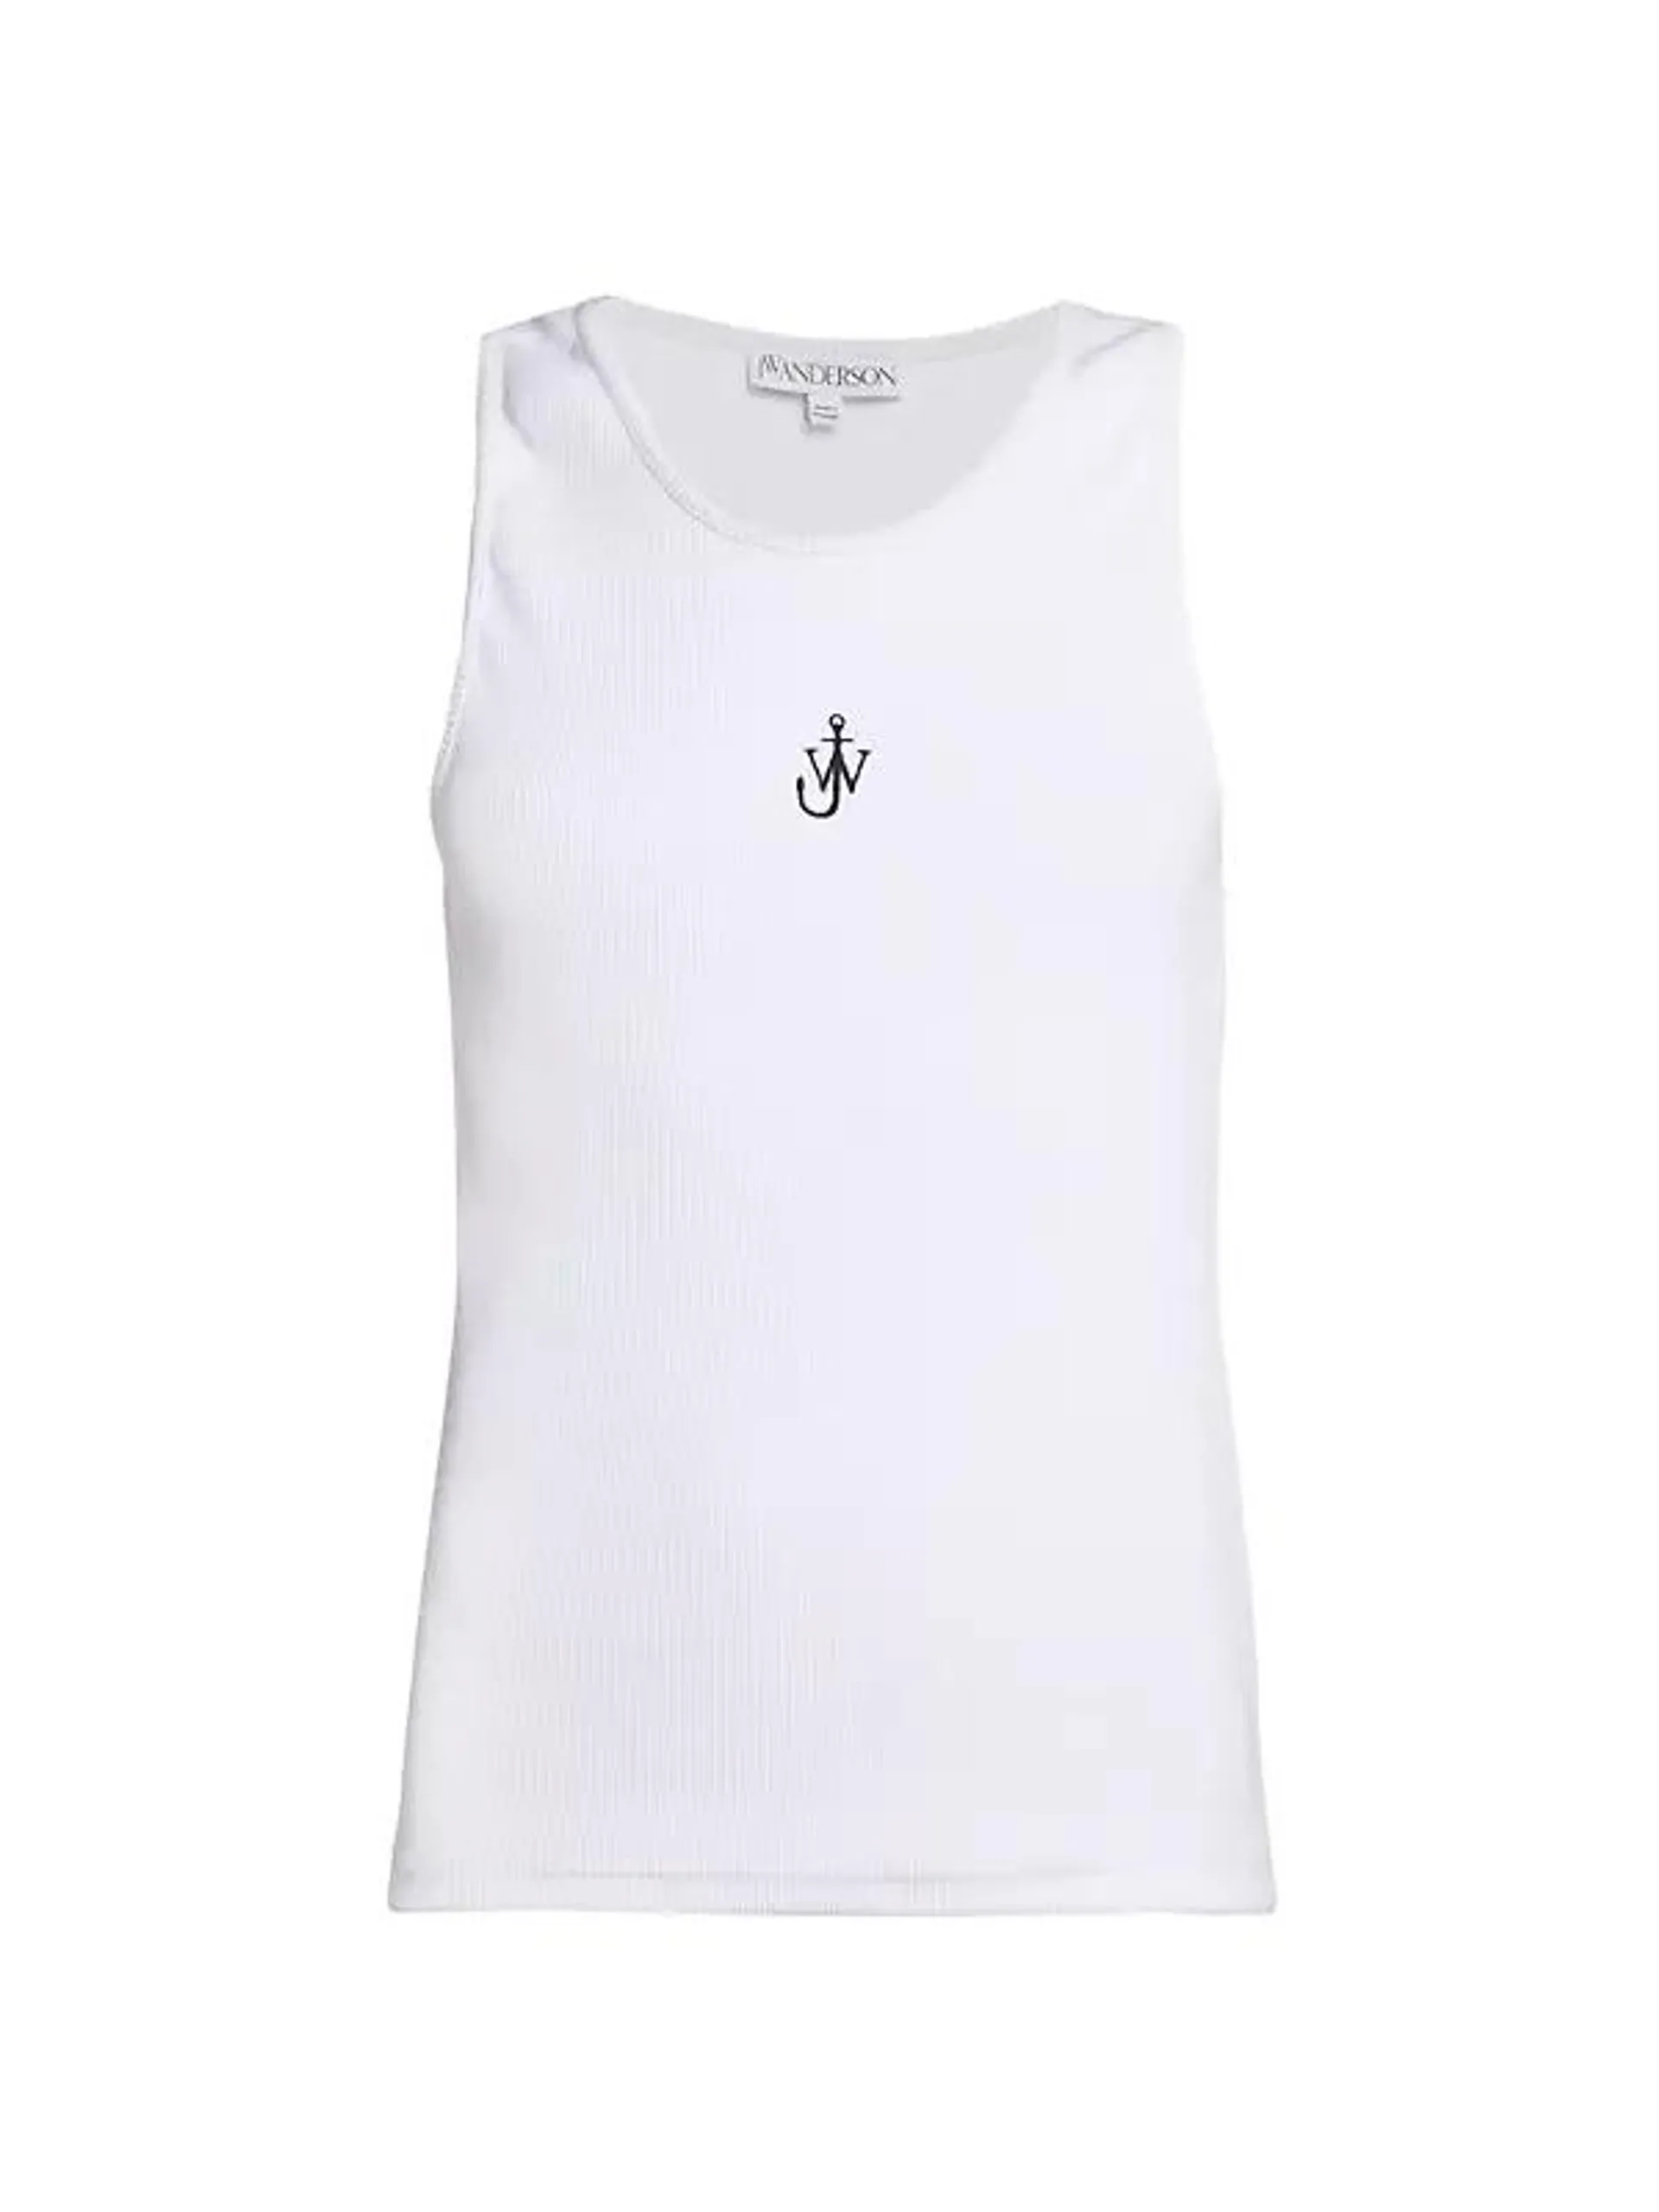 Embroidered Anchor Tank